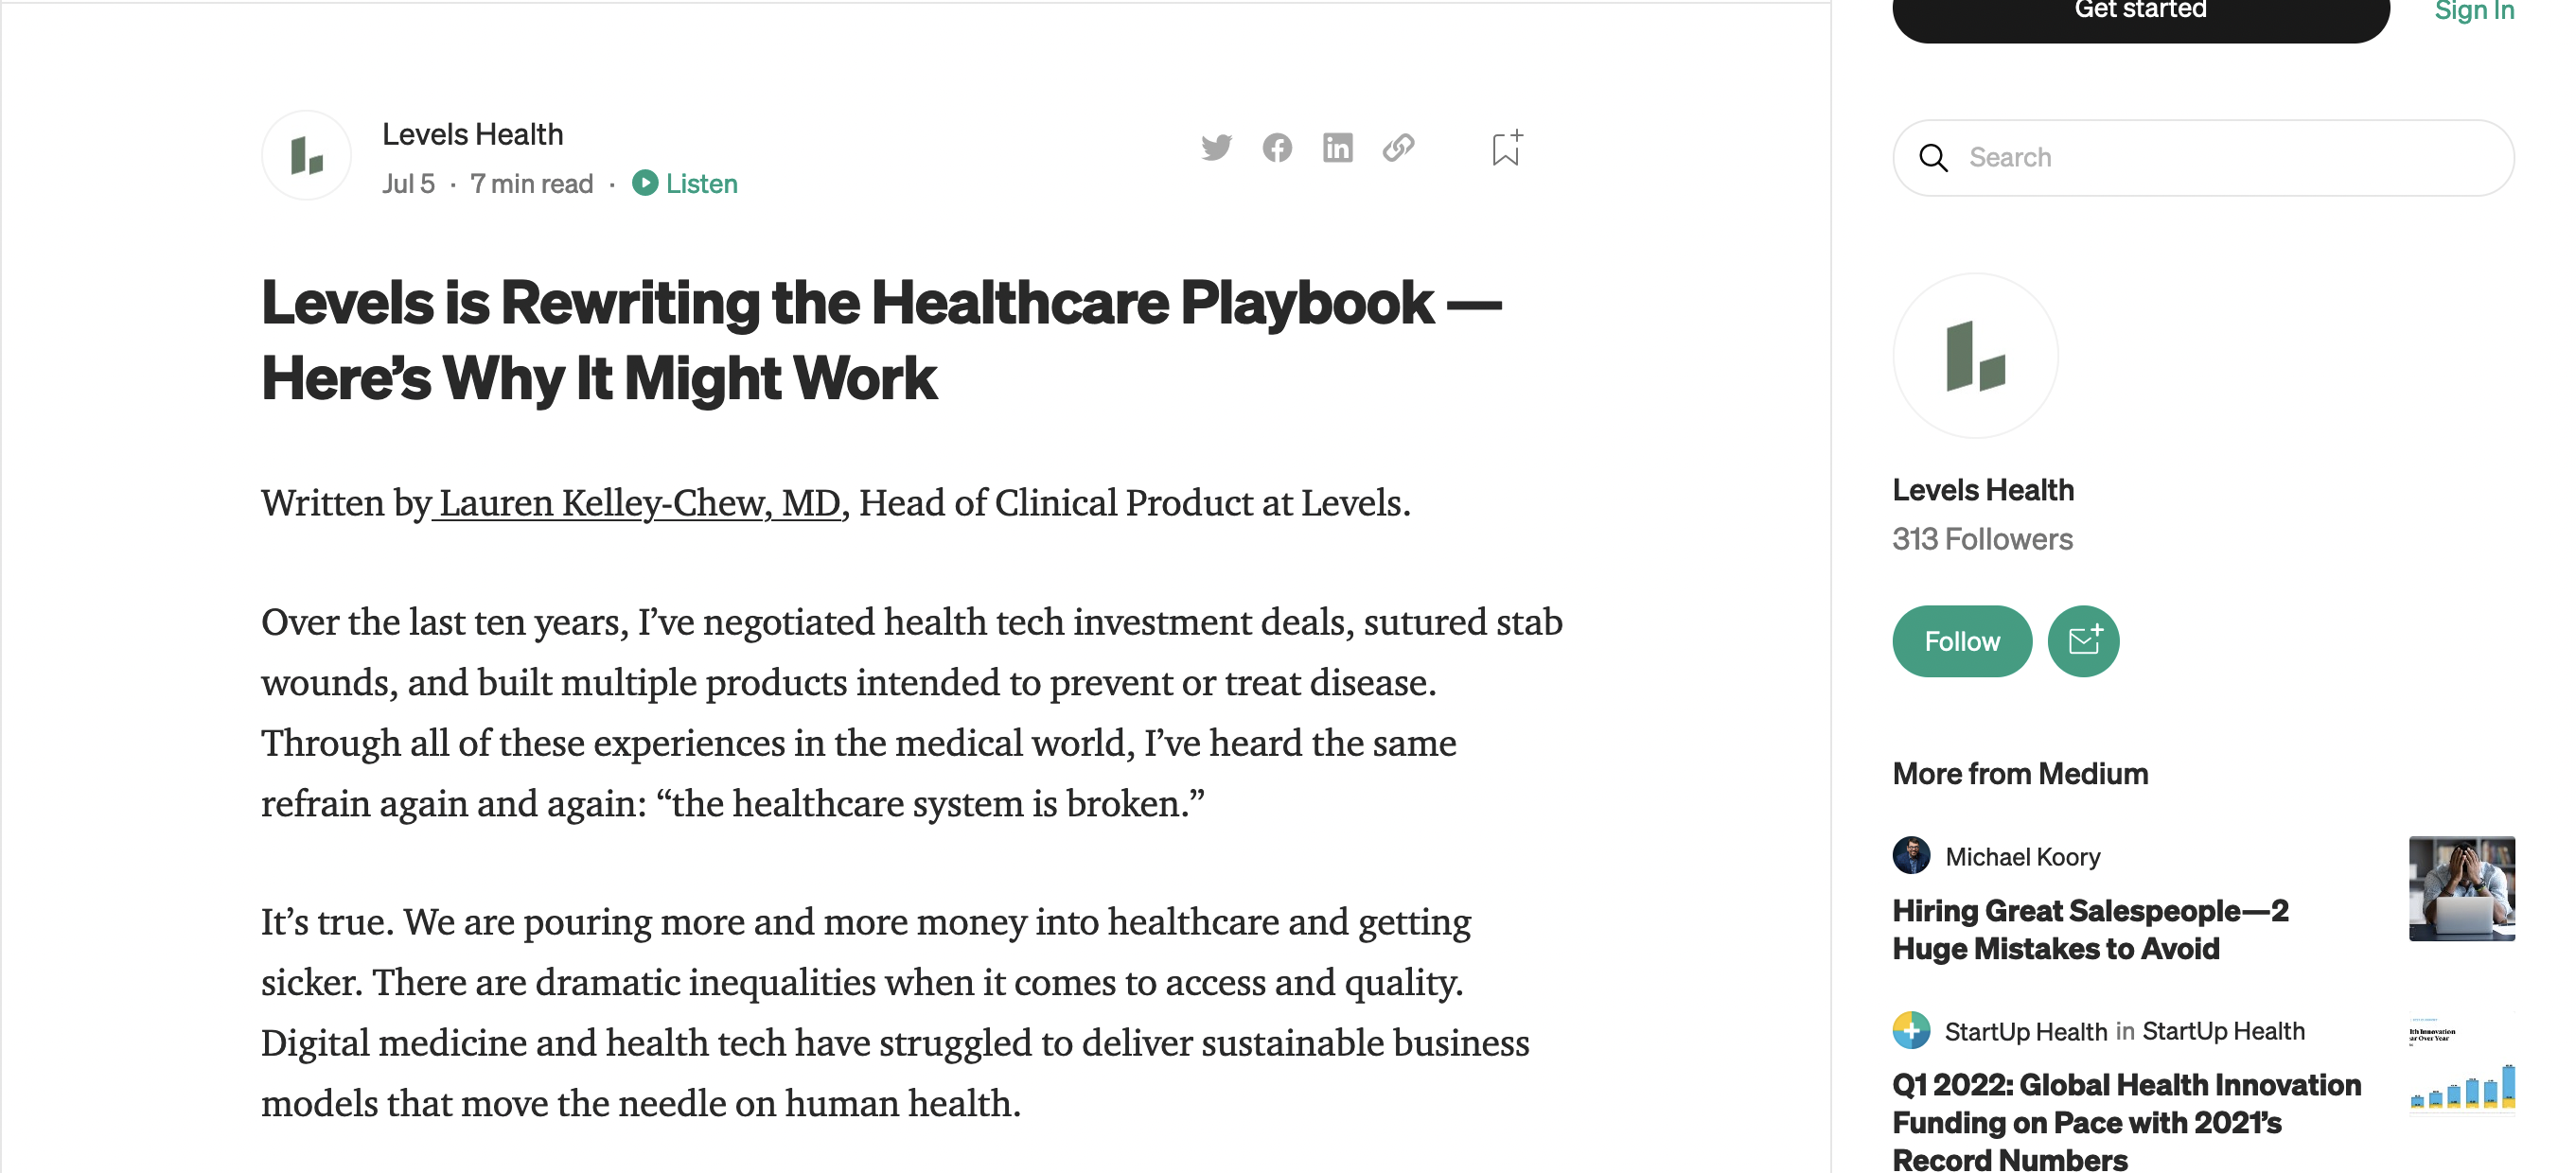 Levels is Rewriting the Healthcare Playbook — Here’s Why It Might Work